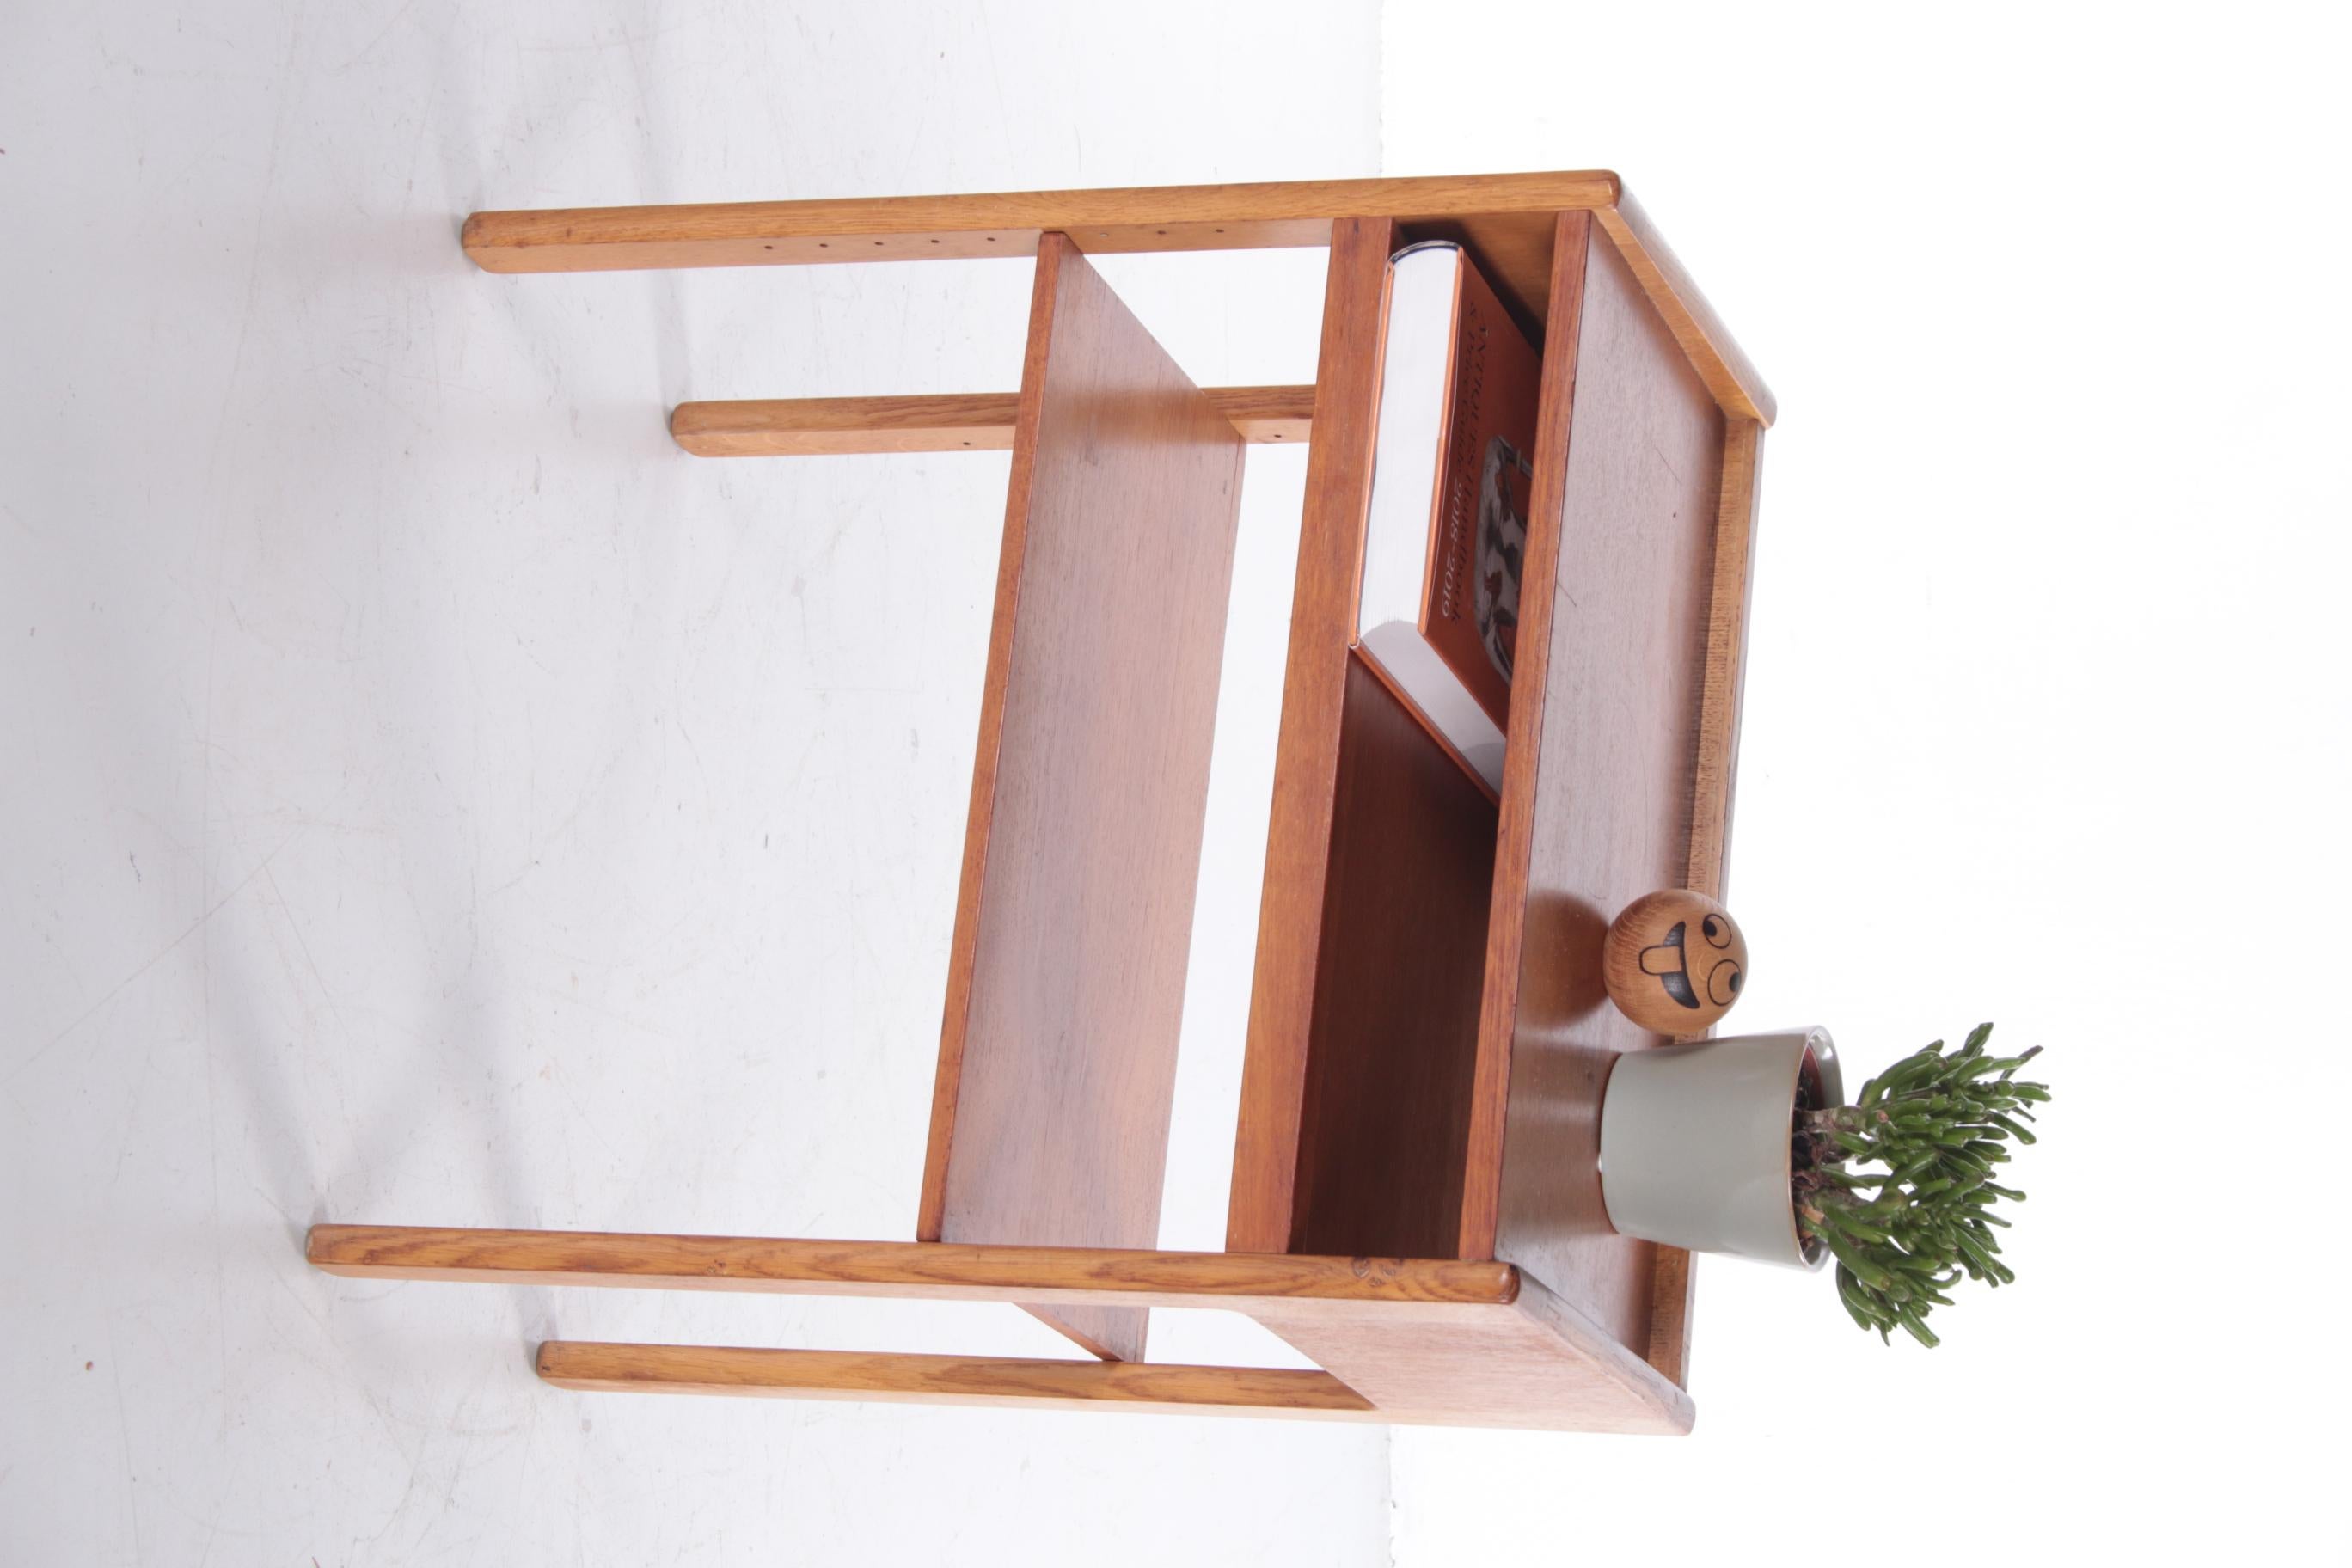 Bedside table Danish cabinet with 3 shelves 1960s


Beautiful Danish design bedside table made of teak.

In the 60s the bottom shelf is adjustable in height.

Very handy for a magazine or book and on top of your phone.